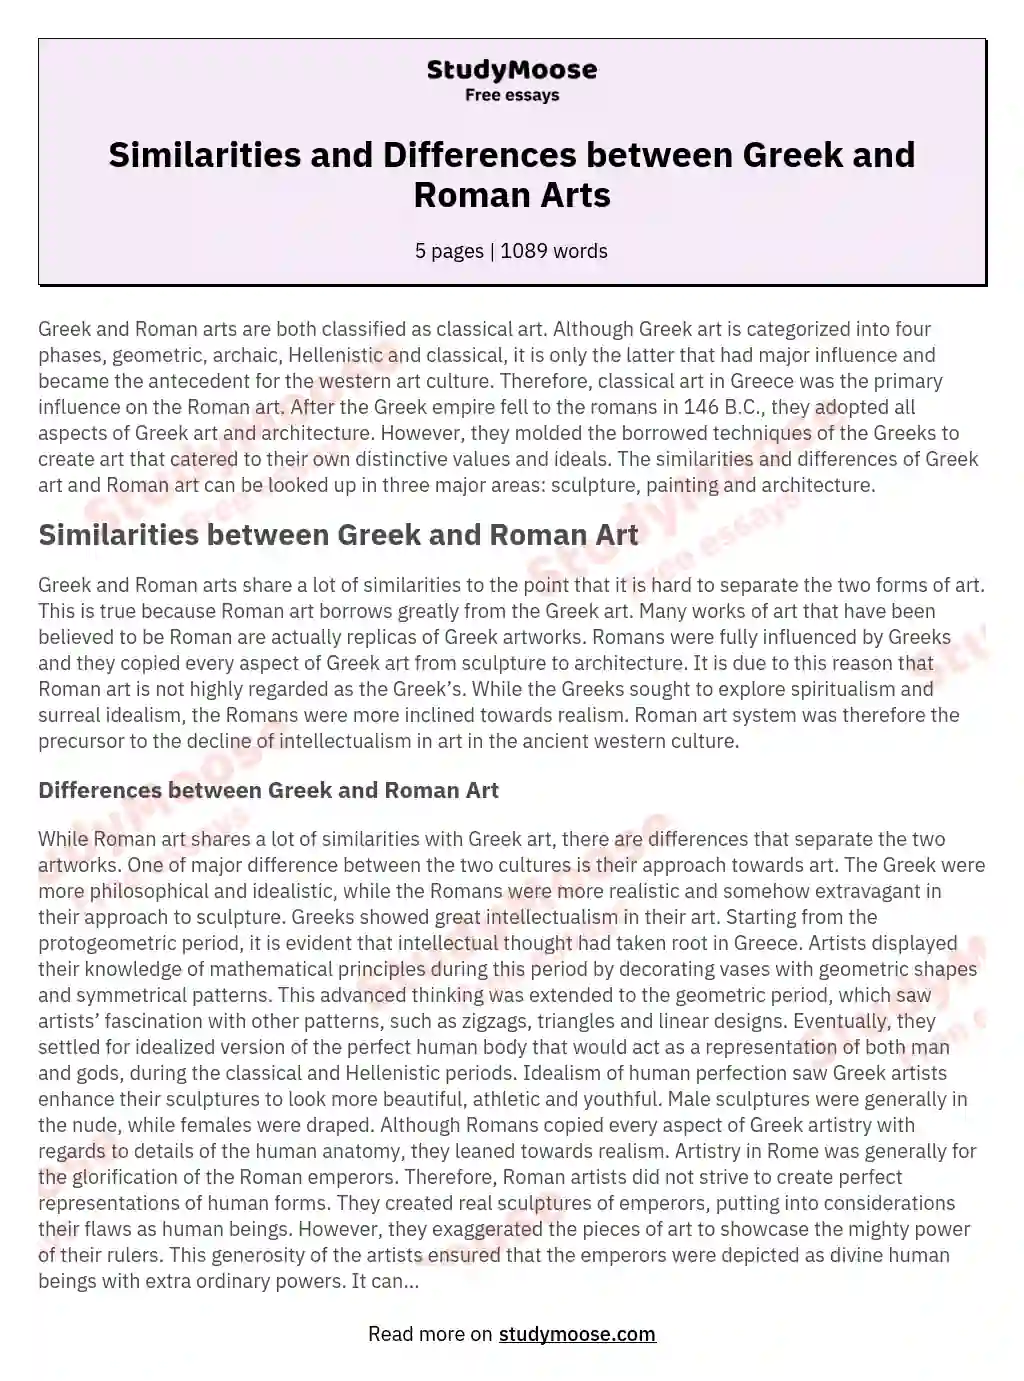 Similarities and Differences between Greek and Roman Arts